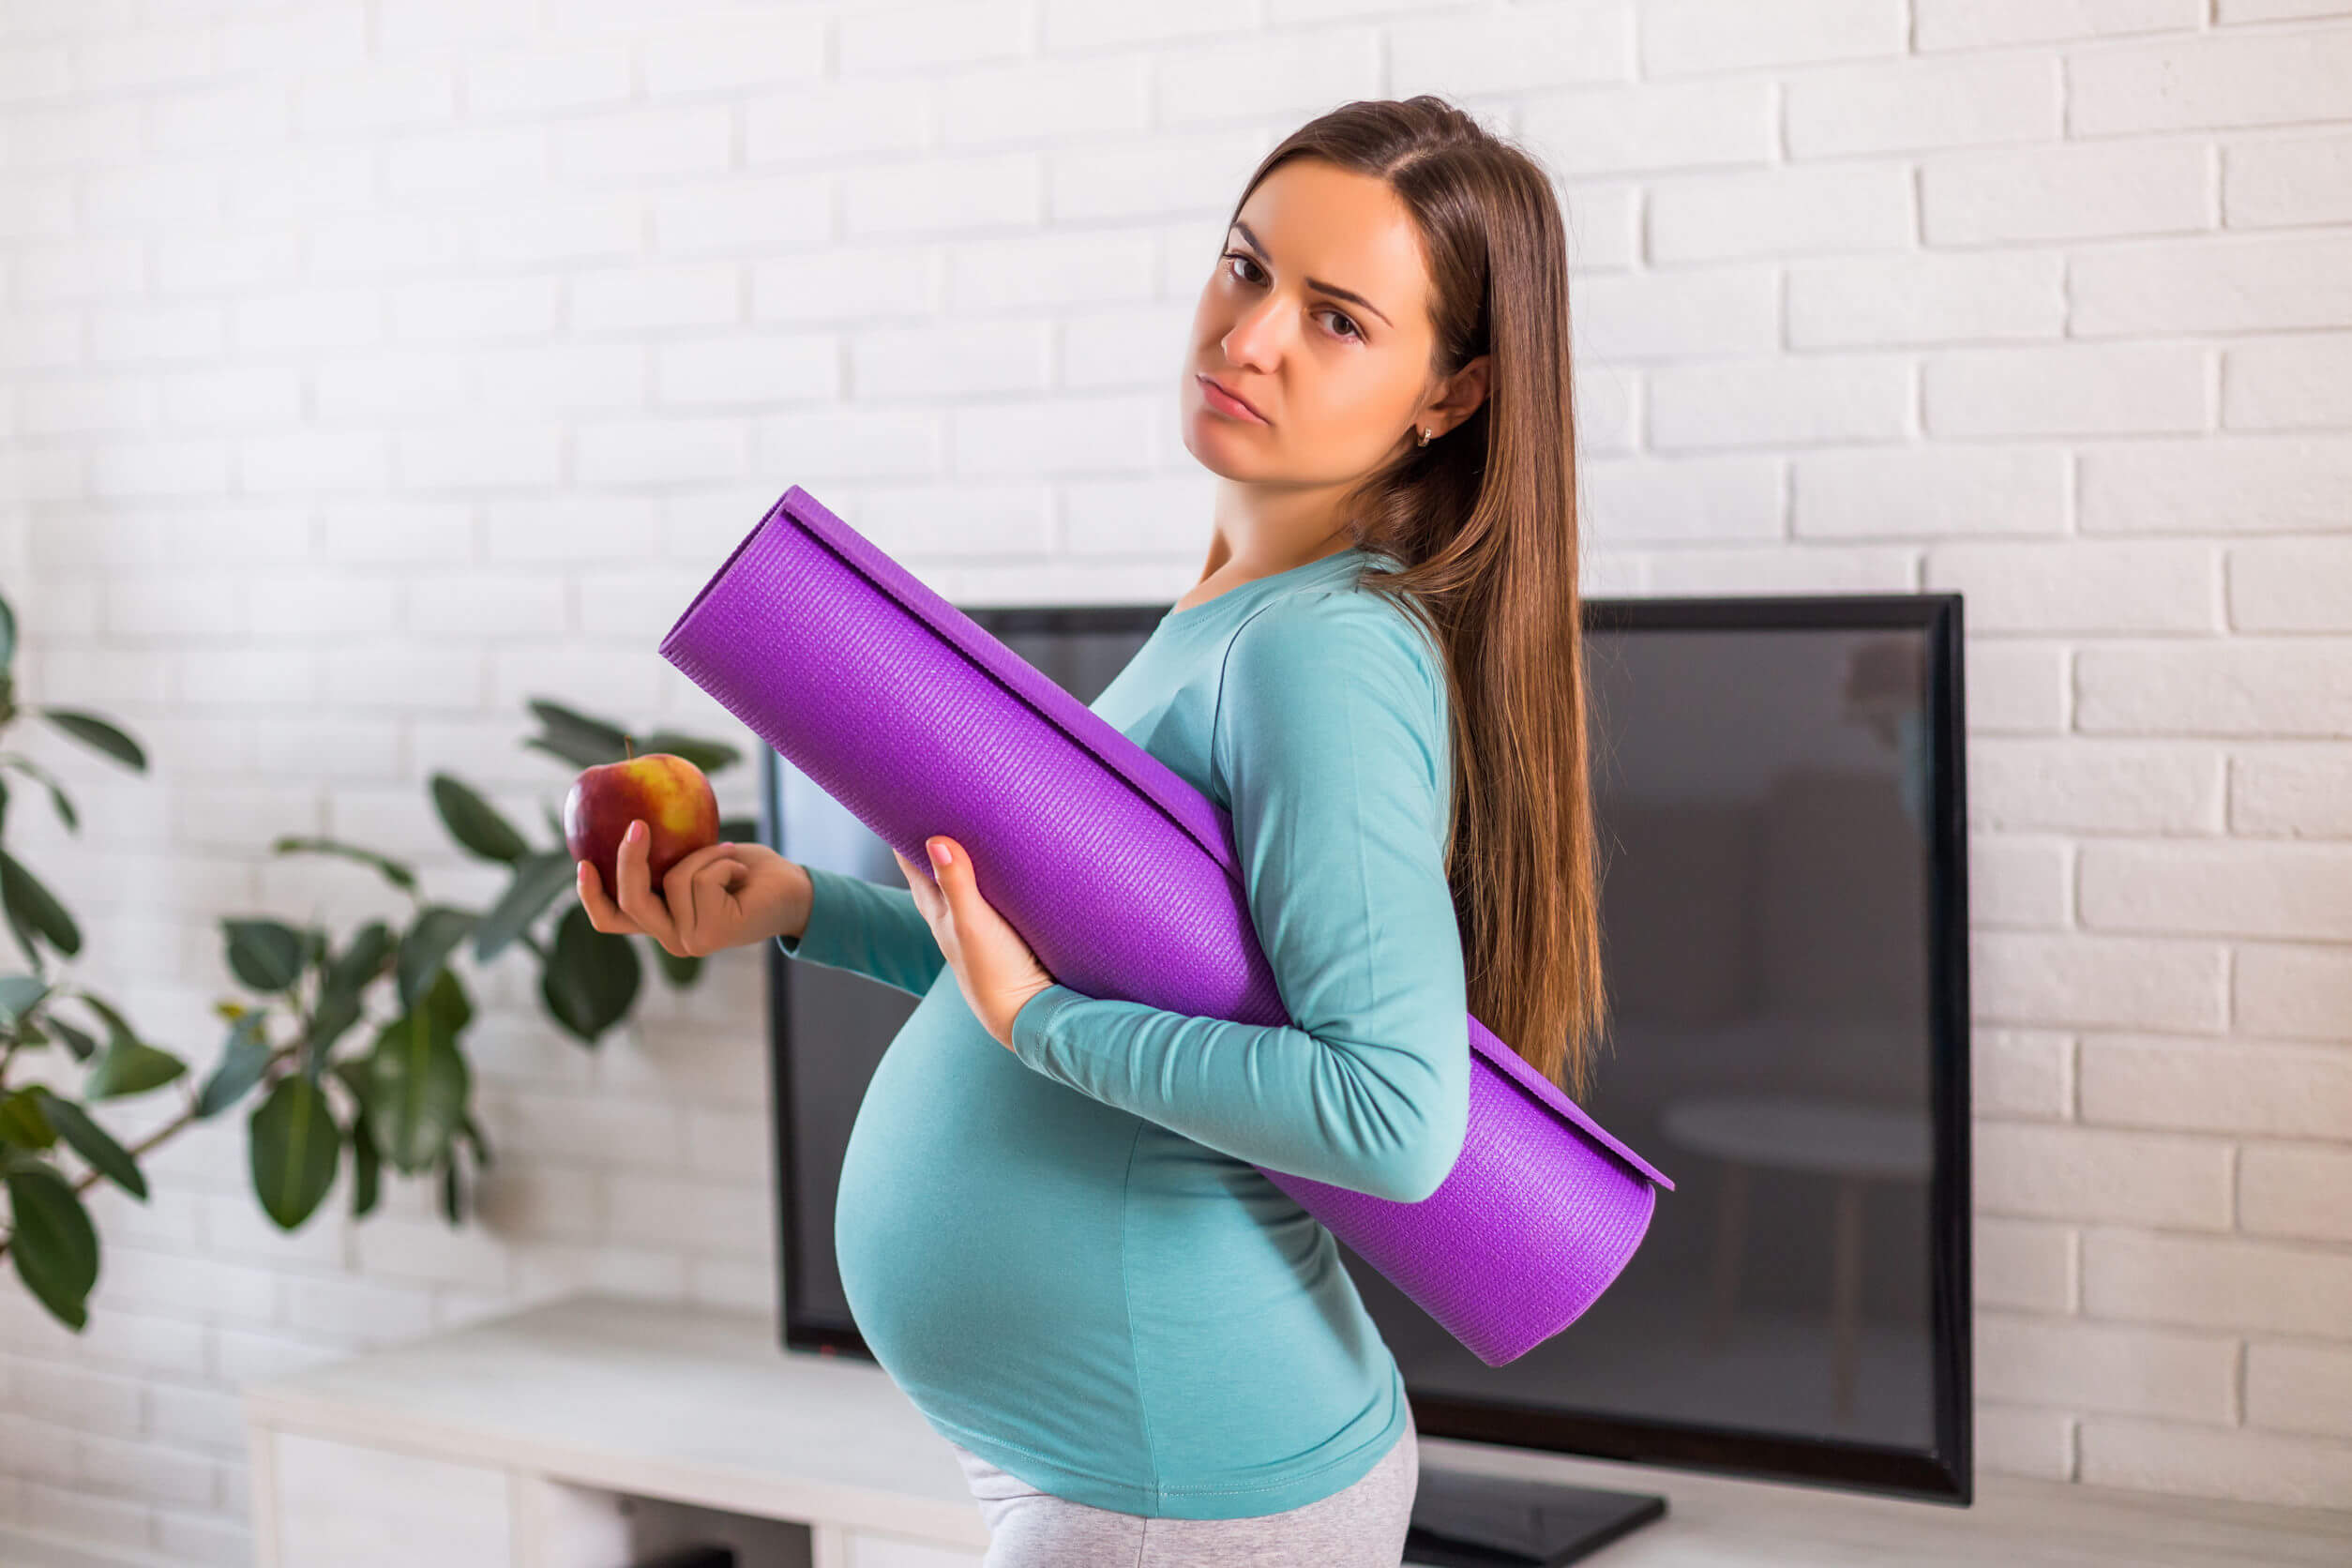 A pregnant woman holding an apple and carrying an exercise mat under her arm.